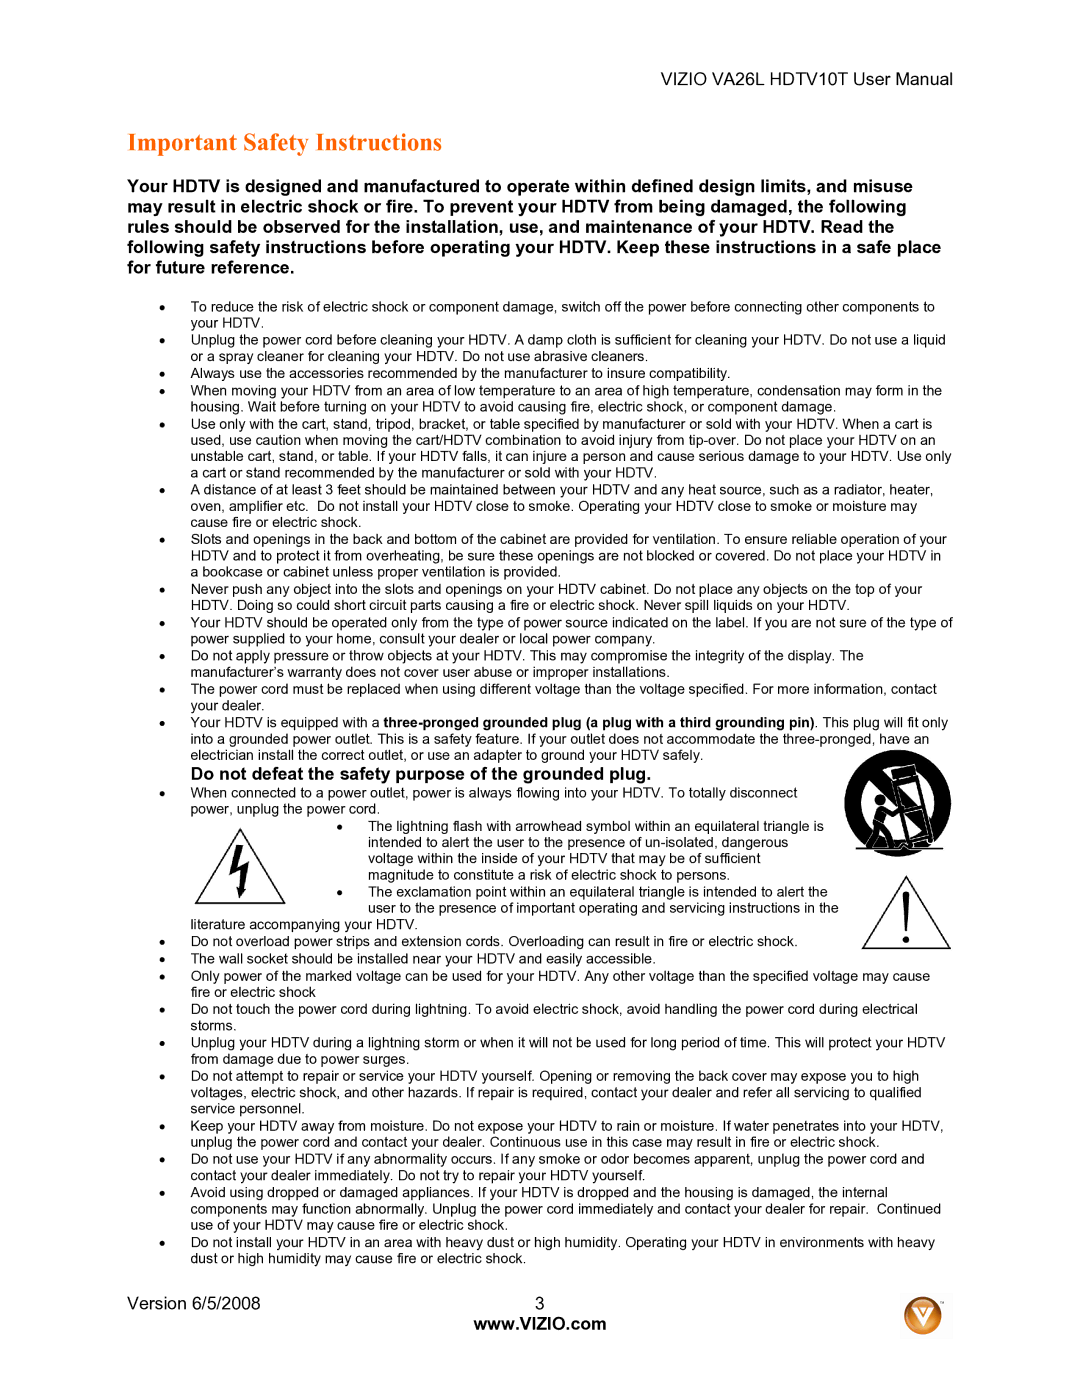 Vizio VA26L user manual Important Safety Instructions, Do not defeat the safety purpose of the grounded plug 